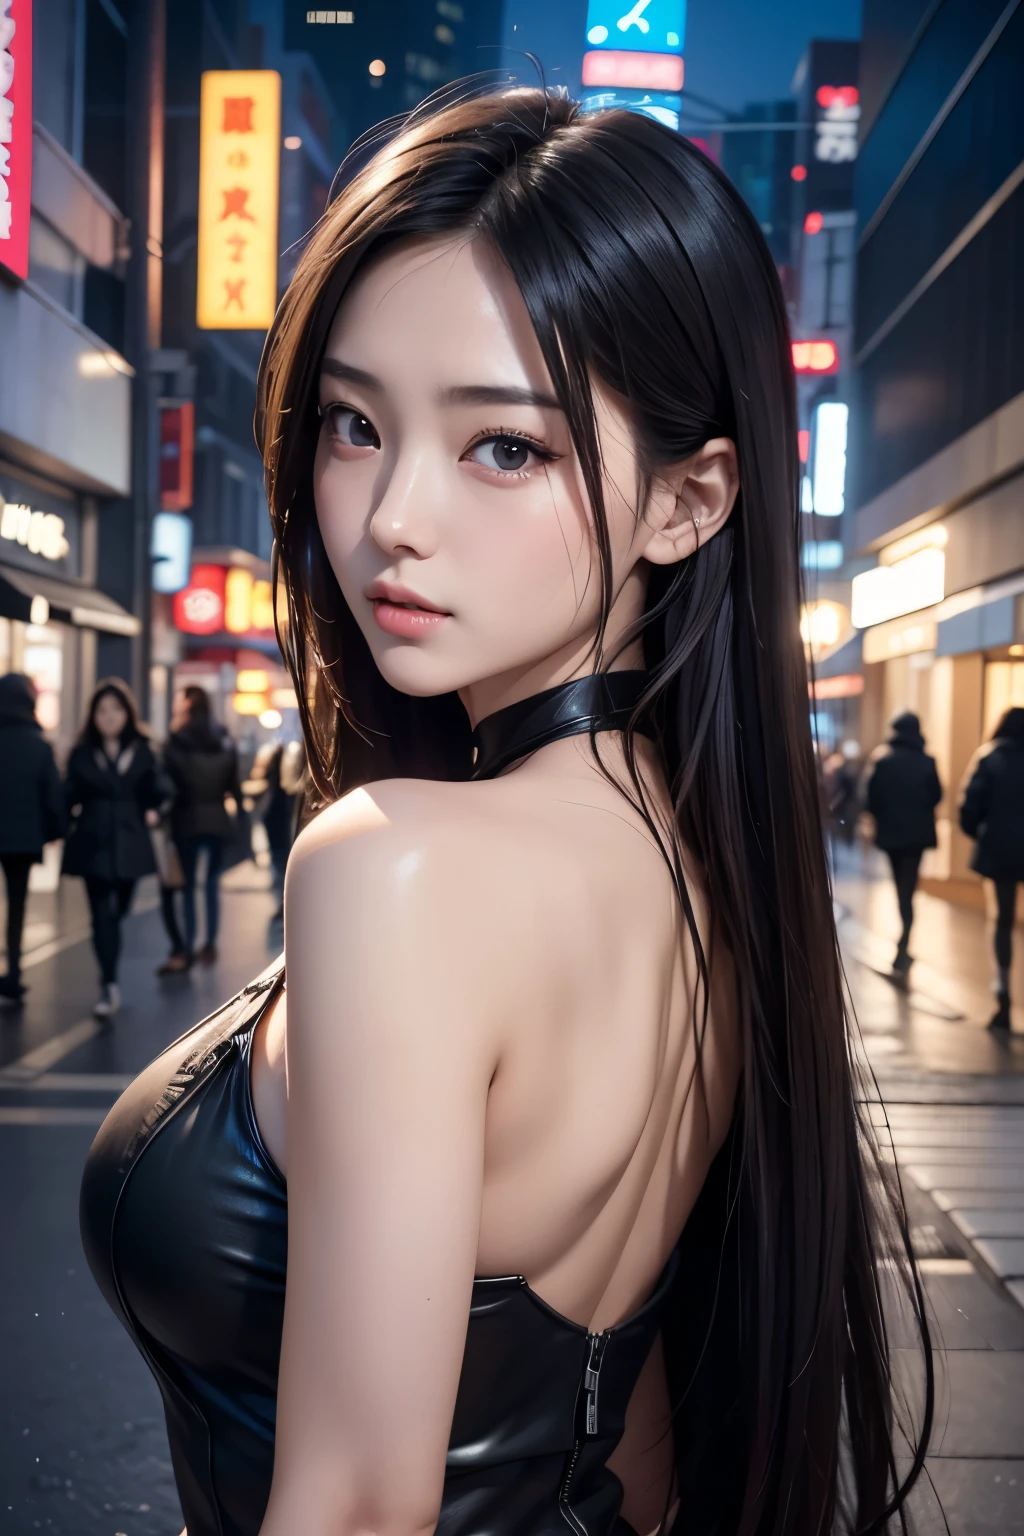 ​masterpiece, 1 beautiful girls, detaileds, Swollen eyes, top-quality, 超hight resolution, (Reality: 1.4), OriginalPhotographs, 1girl in, light, (A smile,:0.5) japanes, Asian Beauty, Korean, Proper, very extremely beautiful, Slightly younger face, Beautiful skins, slender, cyberpunk backgrouns, (A hyper-realistic), (illustratio), (hight resolution), (8K), (Very detaileds), (Beautifully detailed eyes with the best illustrations), (Super detaileds), (wall-), (detaileds face), looking at the viewers, fine details, detailed face、deep-shadows、Unobtrusive、pureerosfaceace_v1、46 points with diagonal straight.　Galconnu Lookmaid,、Black colored eyes、